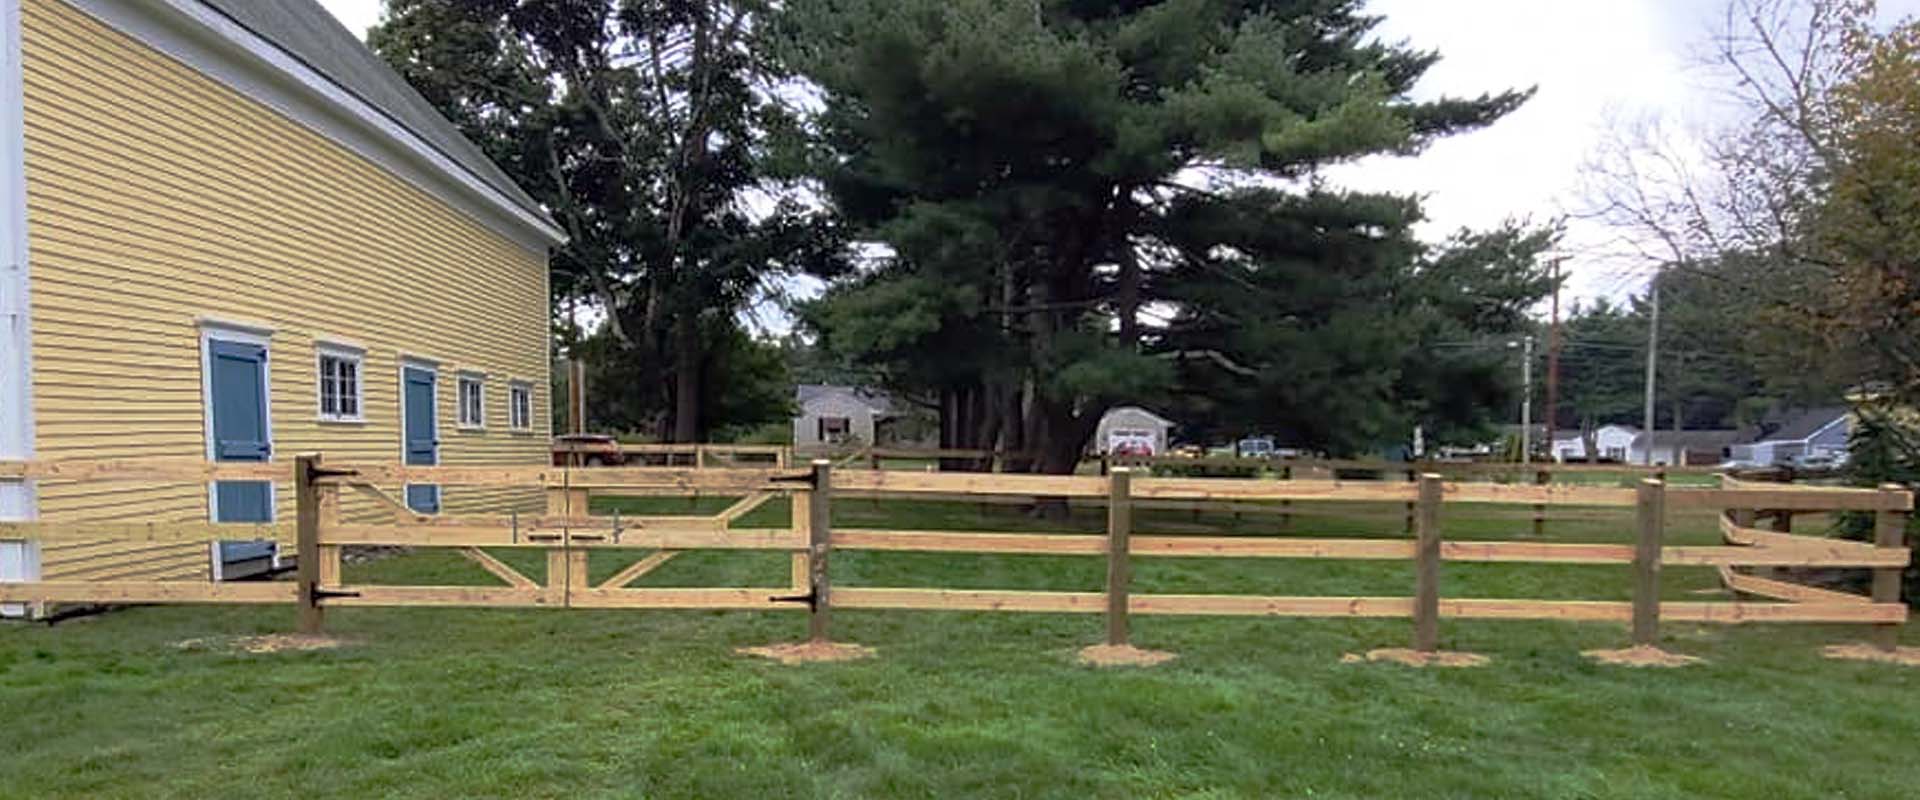 Best fence contractor in southern Maine